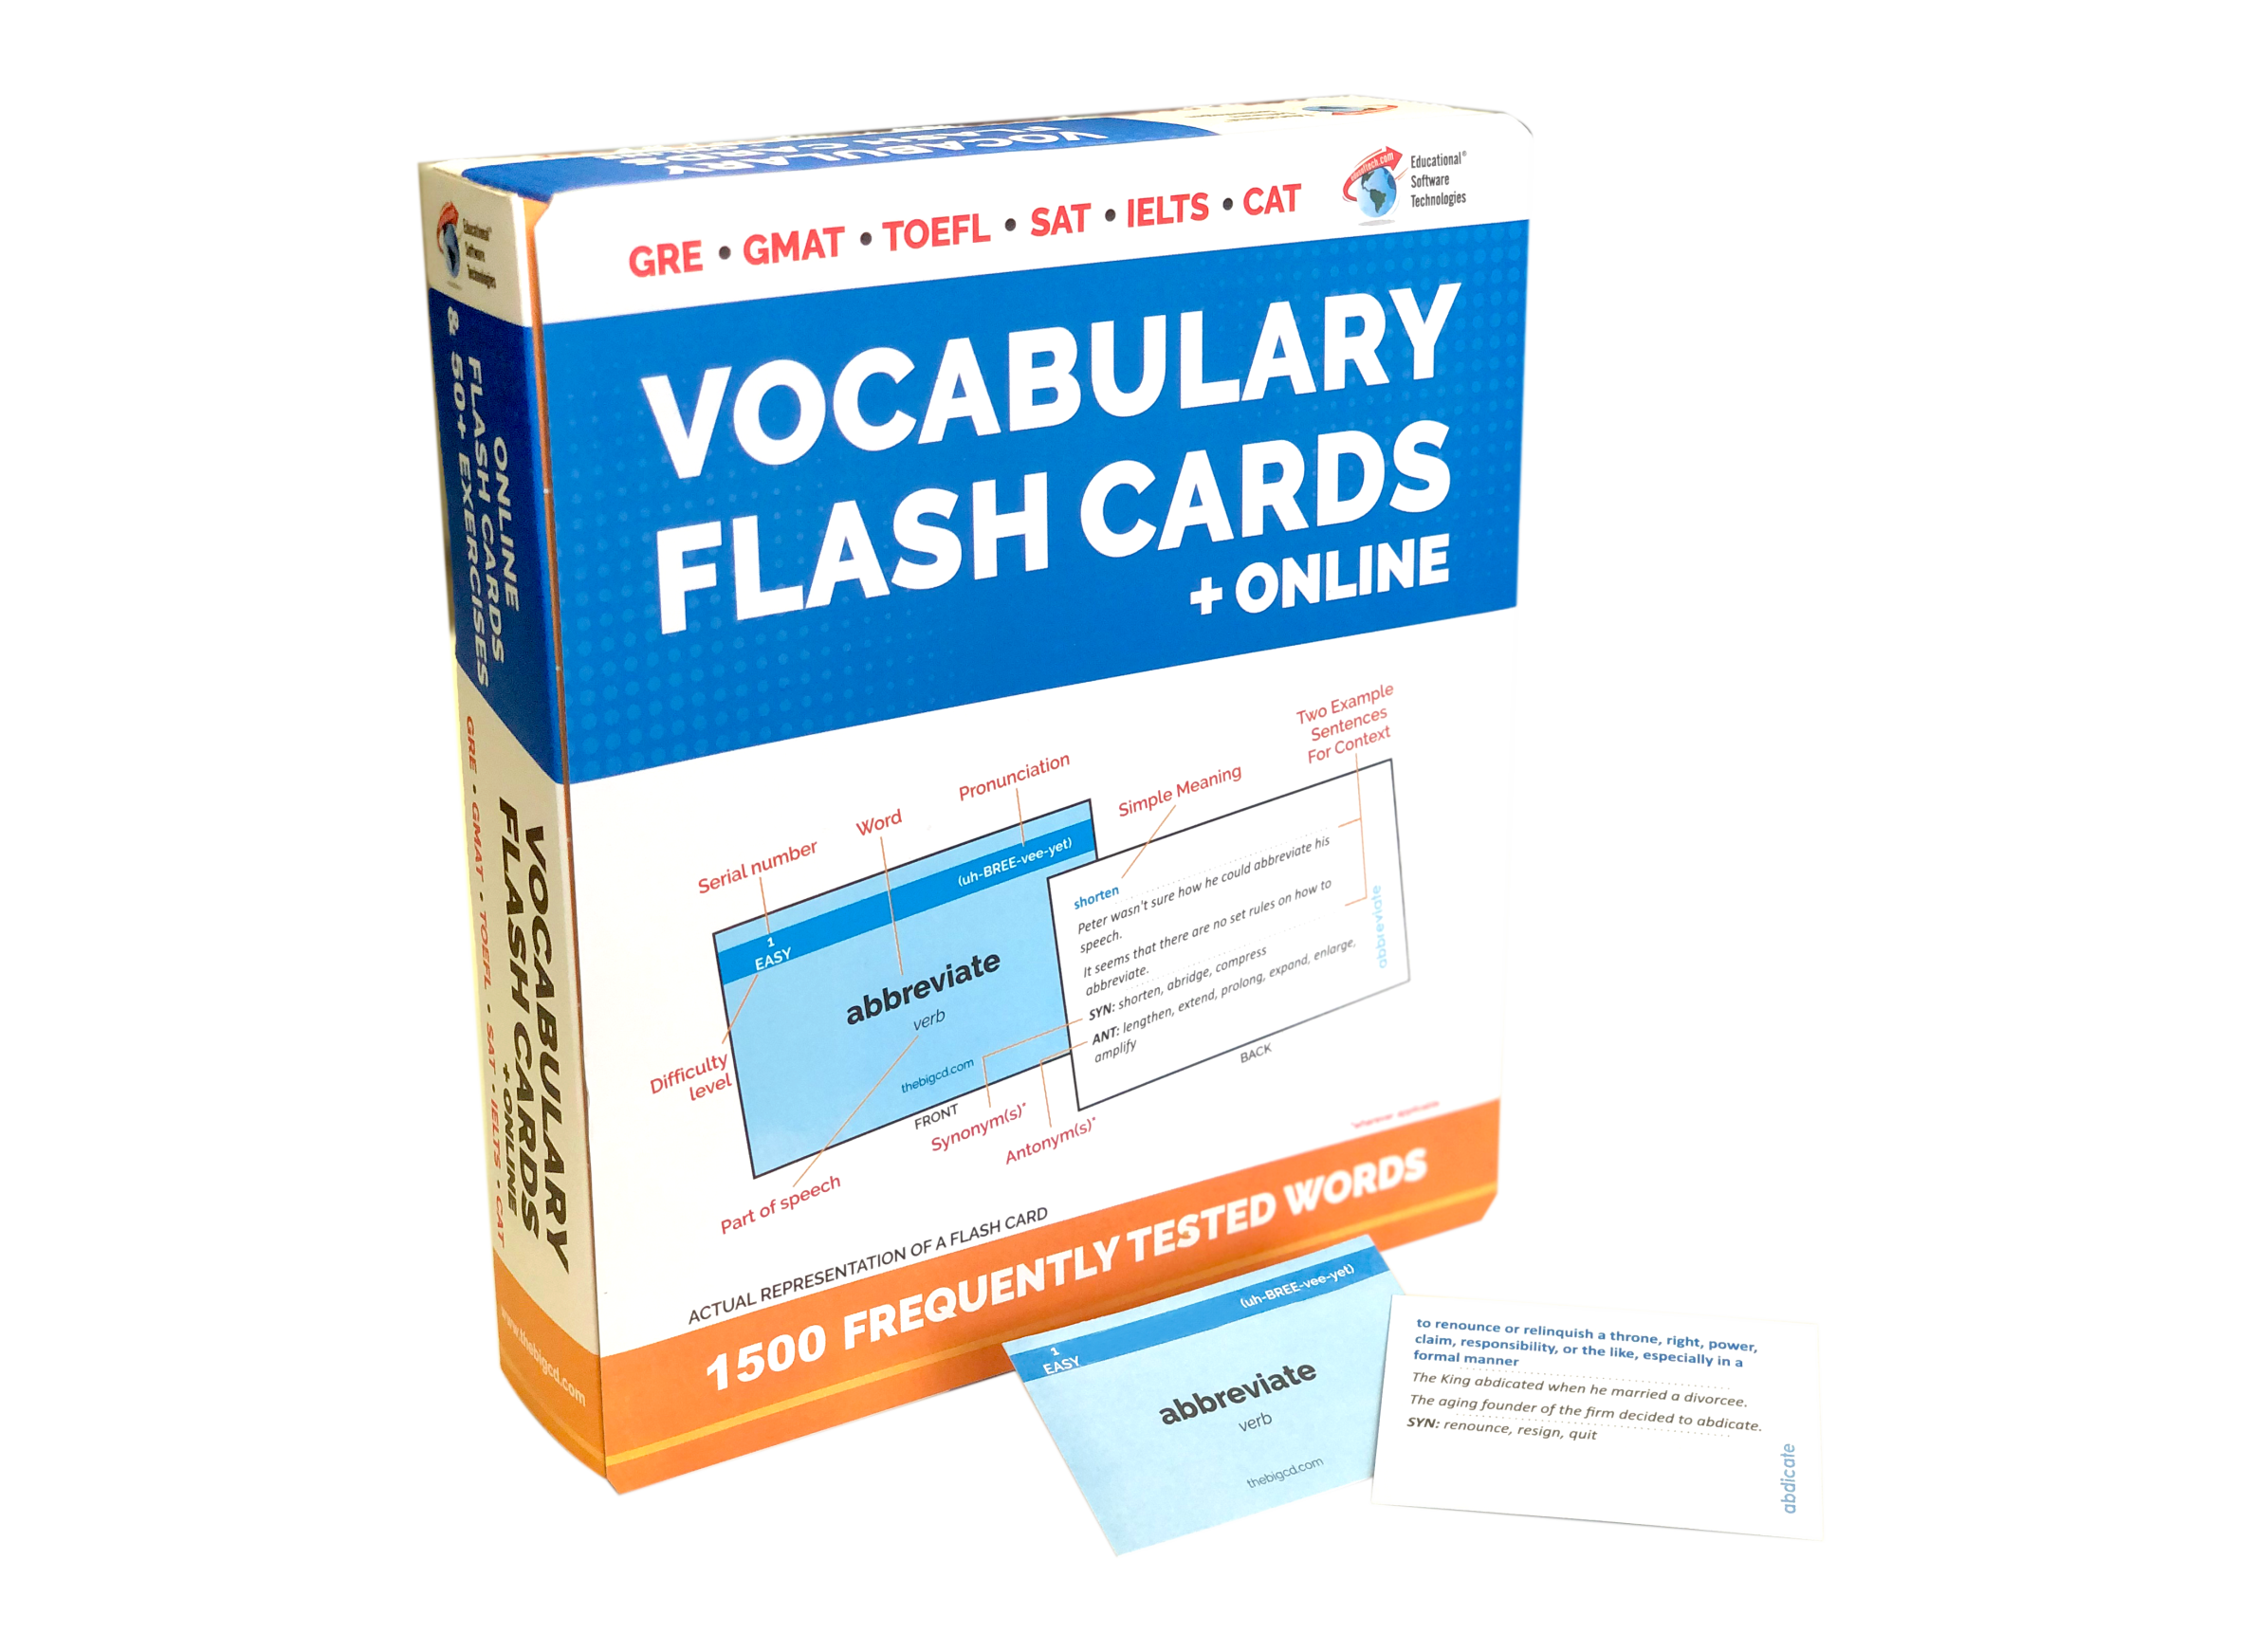 How to Make Vocabulary Flash Cards Online